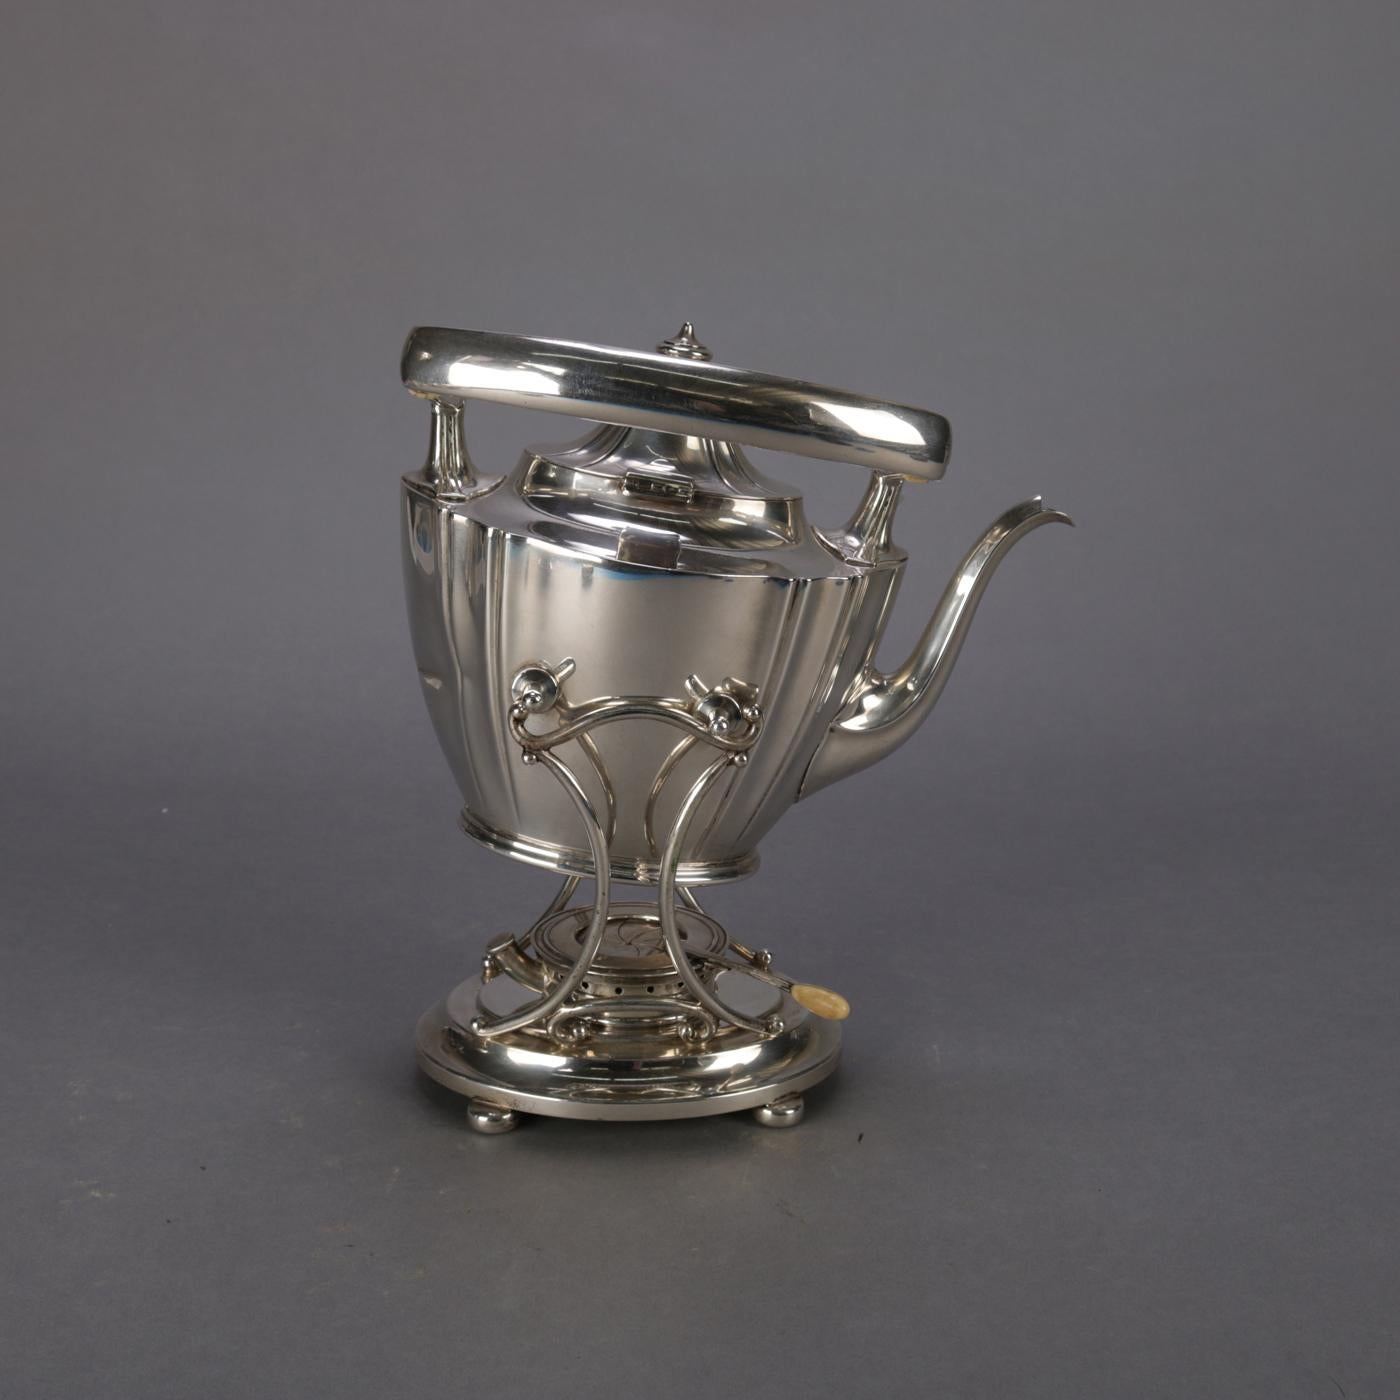 Sterling silver teapot by J.E. Caldwell & Co. feature tapered vessel with swivel handle and seated on footed warming Stand with burner, maker marks on base as photographed, total weight 44.12 toz (27.89 toz teapot only), 20th century

***DELIVERY